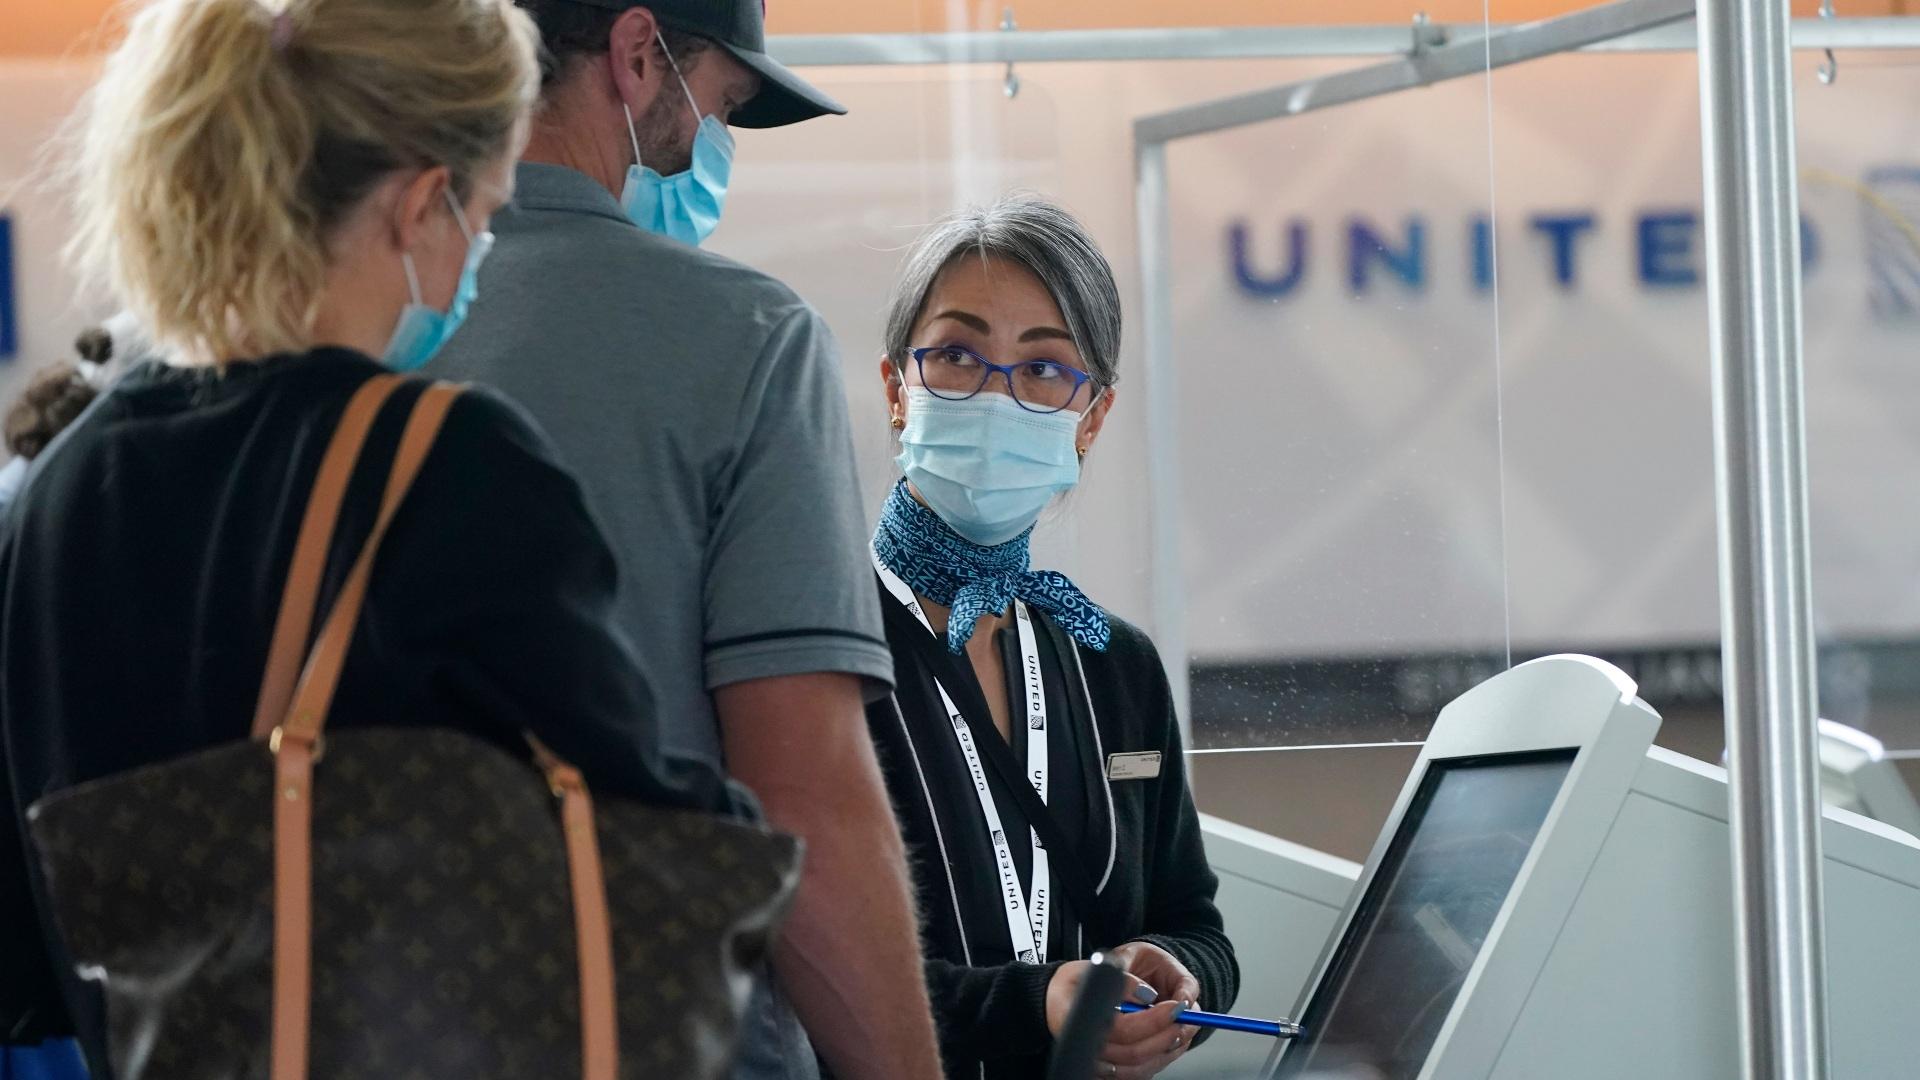 Travelers check in at a United Airlines kiosk with help from a United employee in the main terminal of Denver International Airport Thursday, Oct. 1, 2020, in Denver. (AP Photo / David Zalubowski)